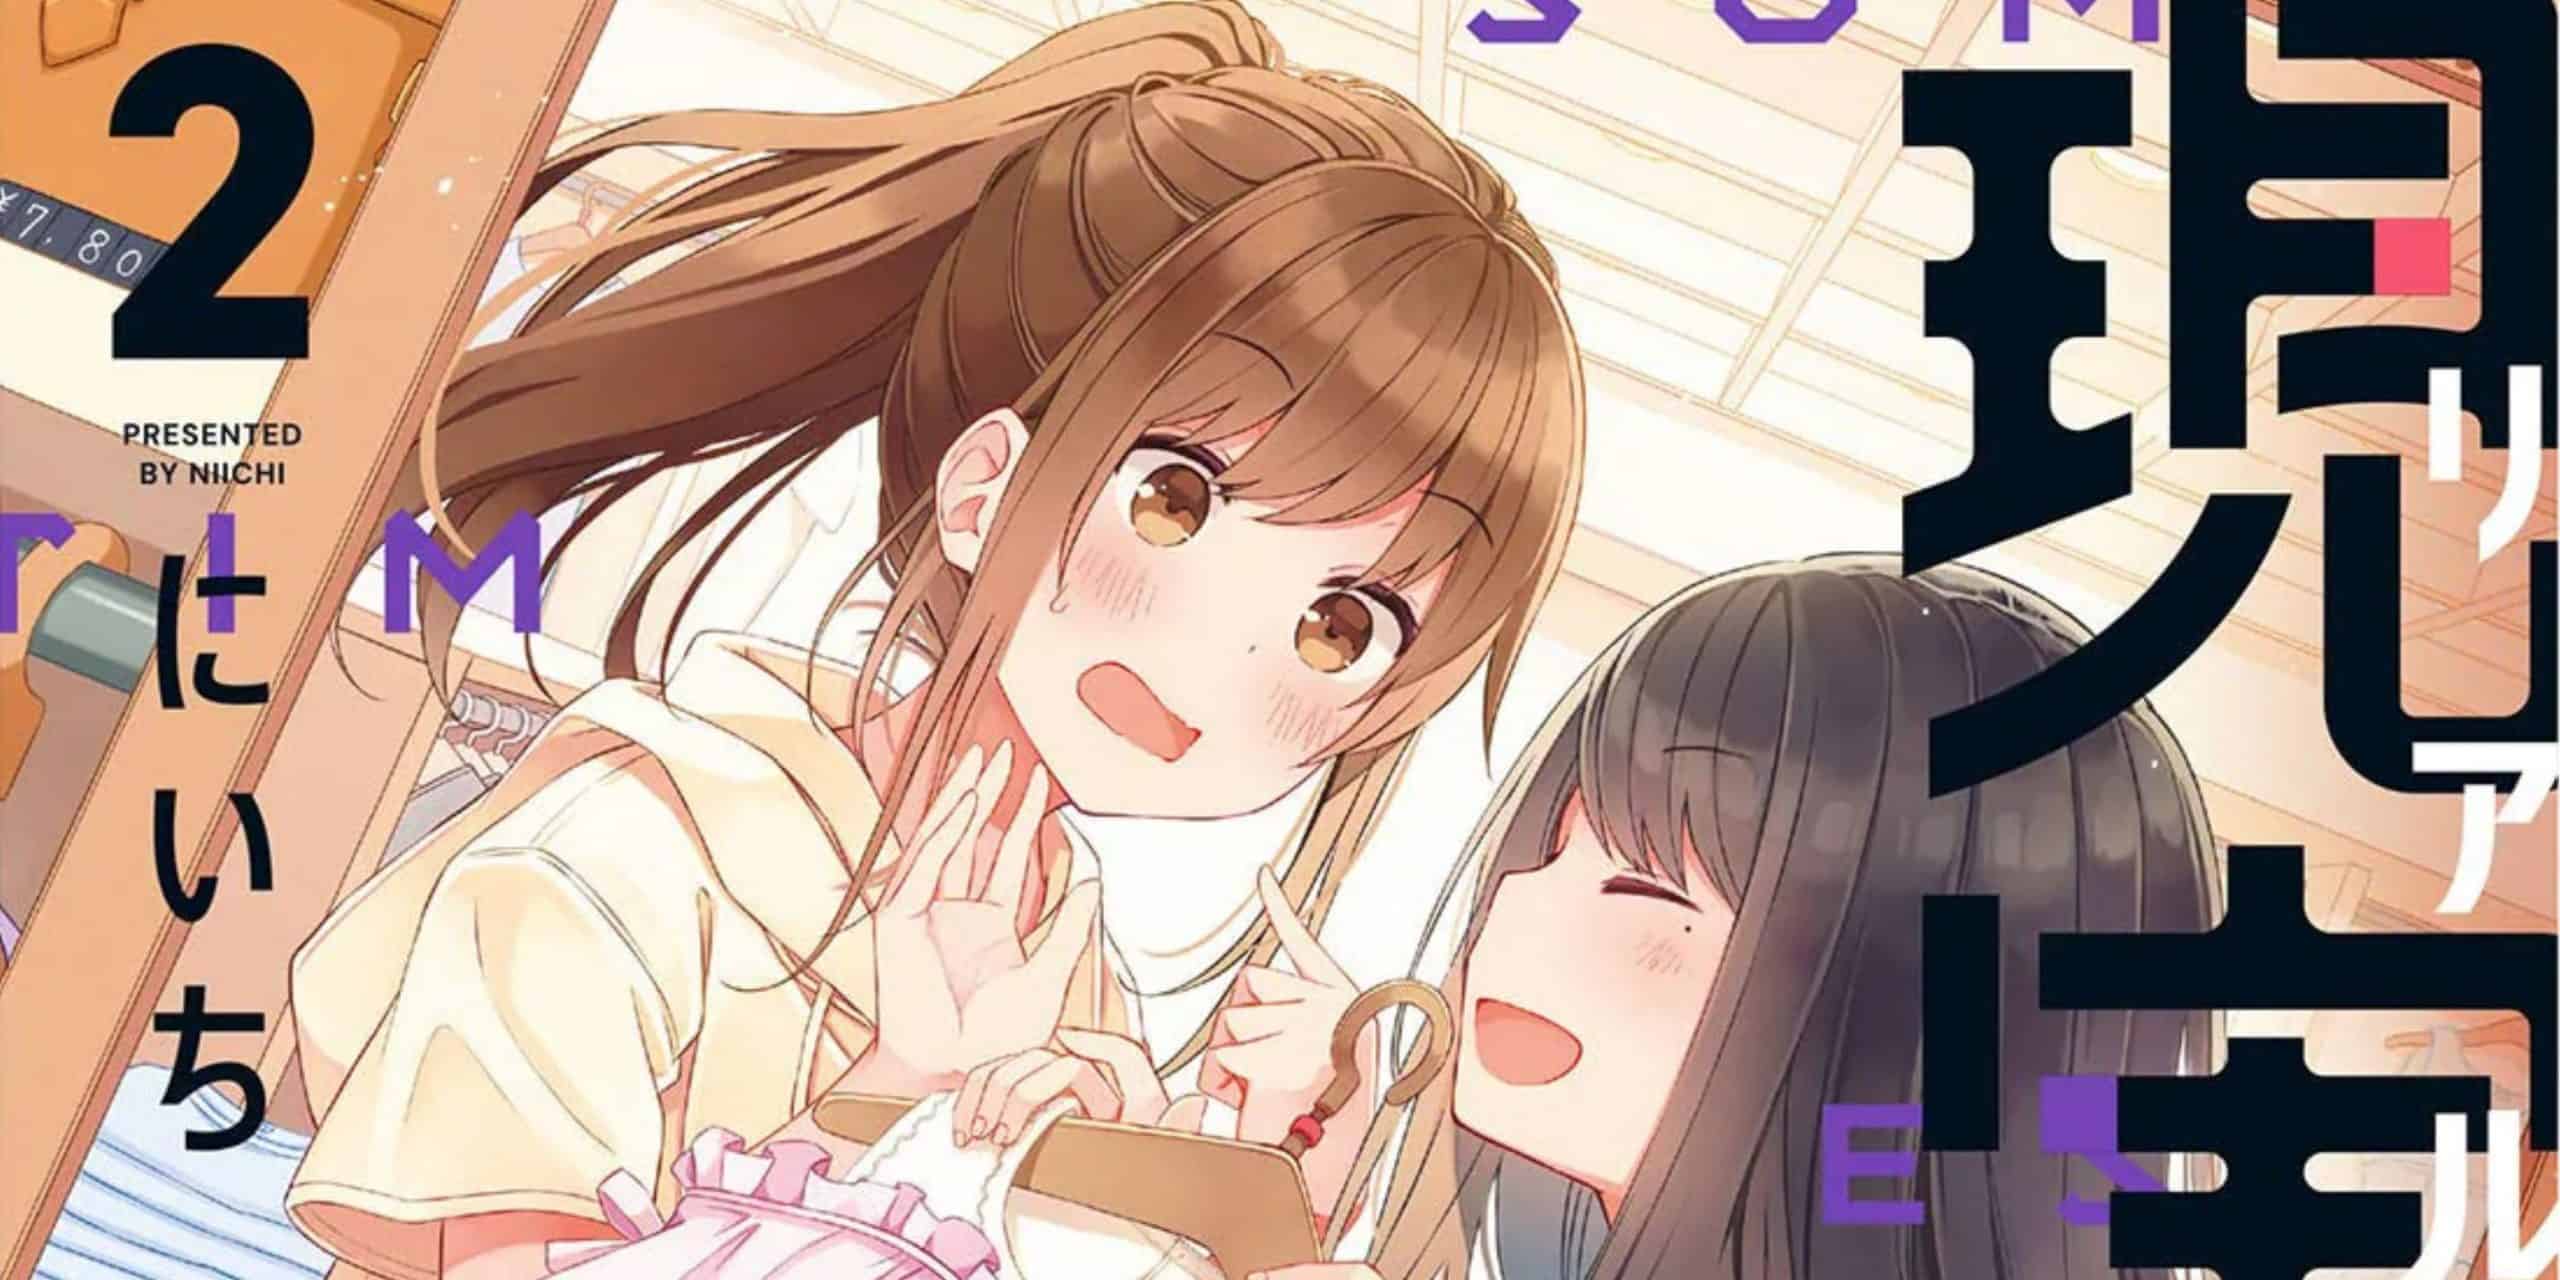 Hanging Out With a Gamer Girl Chapter 159 Release Date